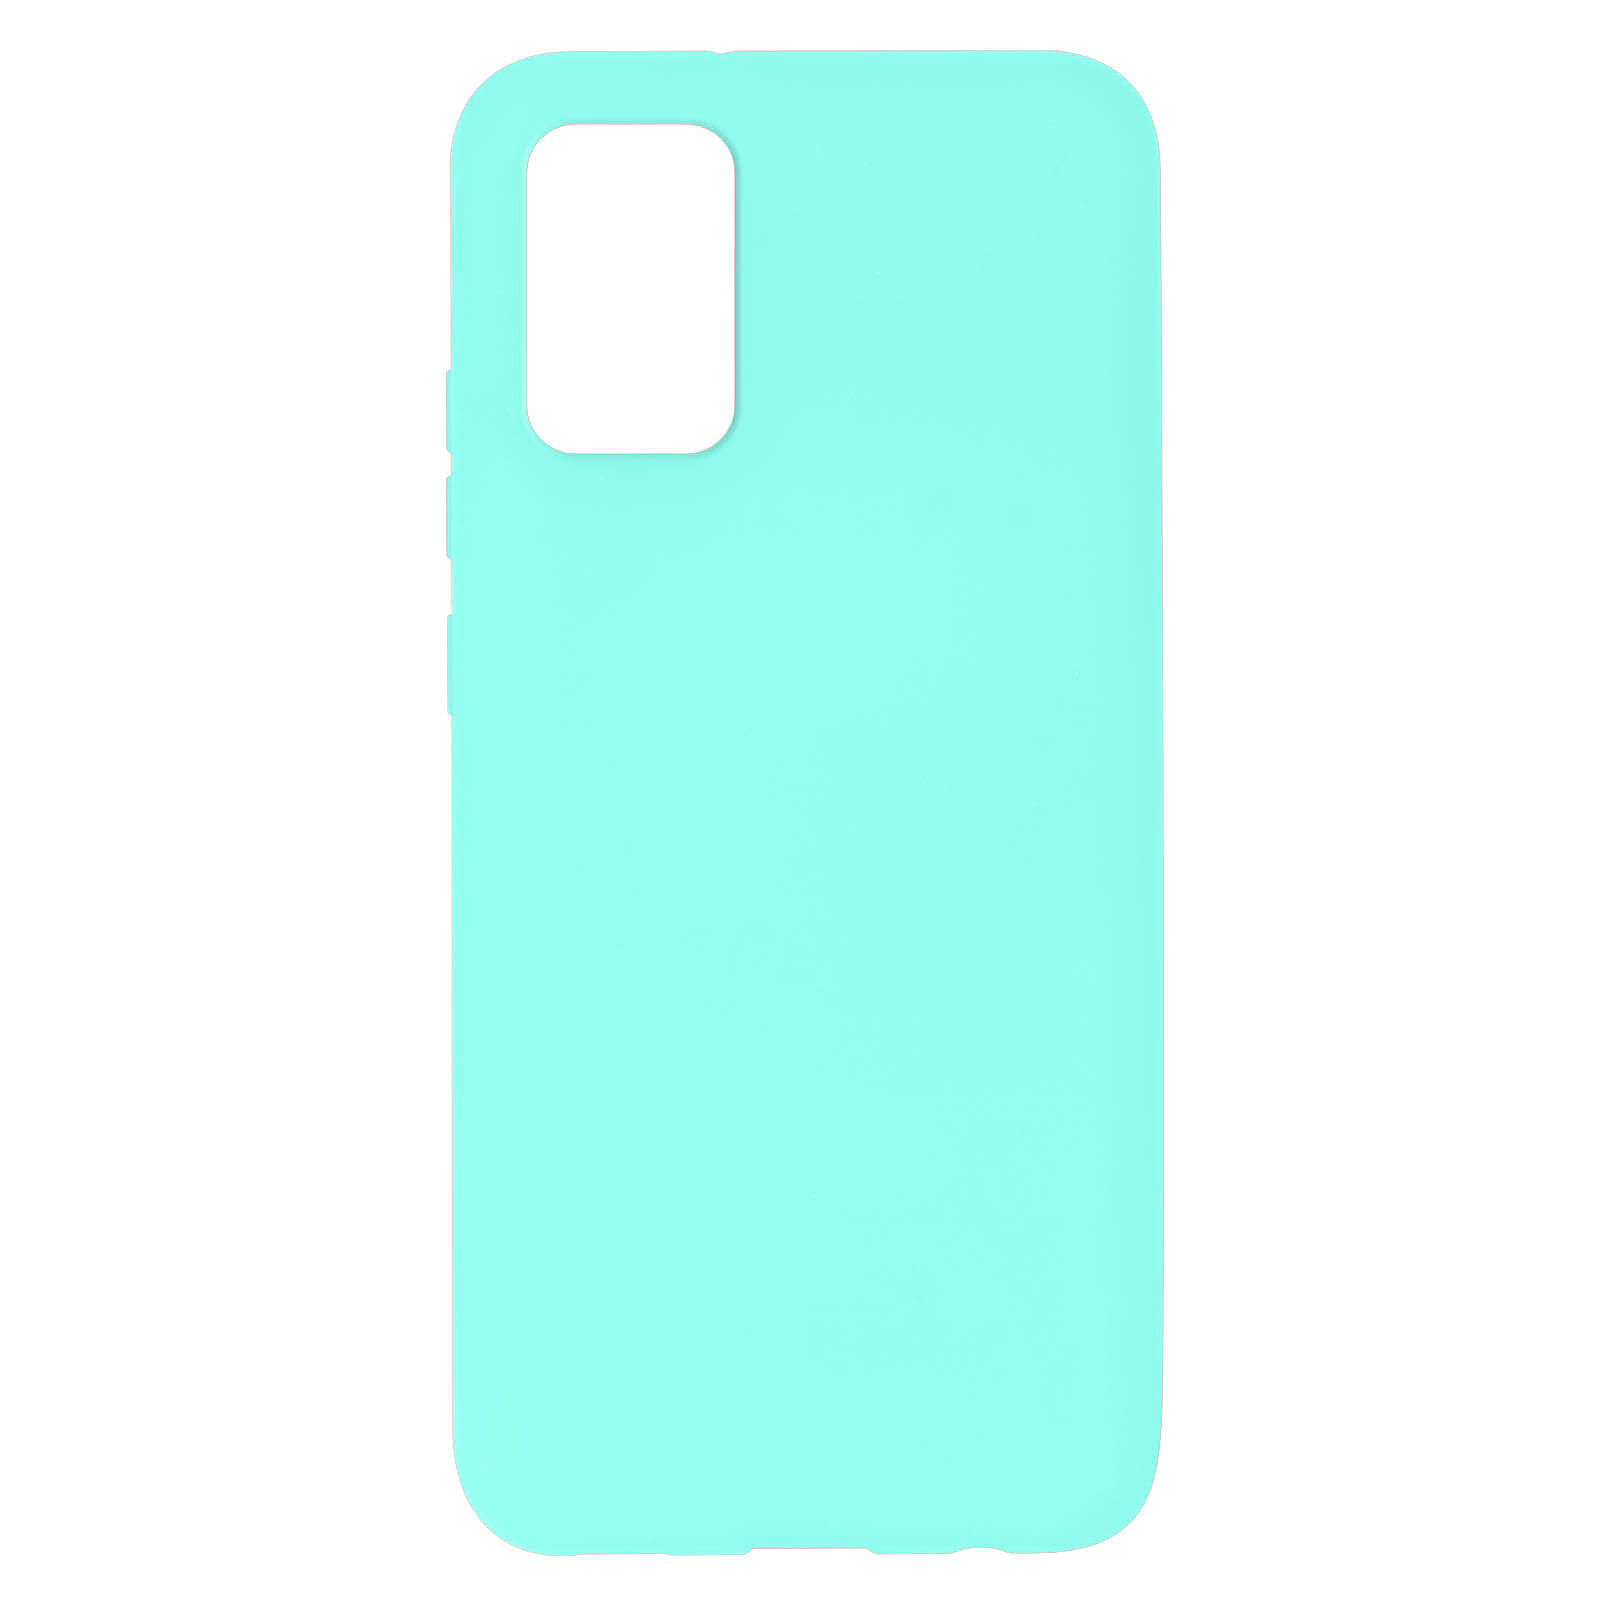 Avizar Coque pour Samsung Galaxy A02s Silicone Gel Souple Finition Soft Touch turquoise - Coque telephone Avizar